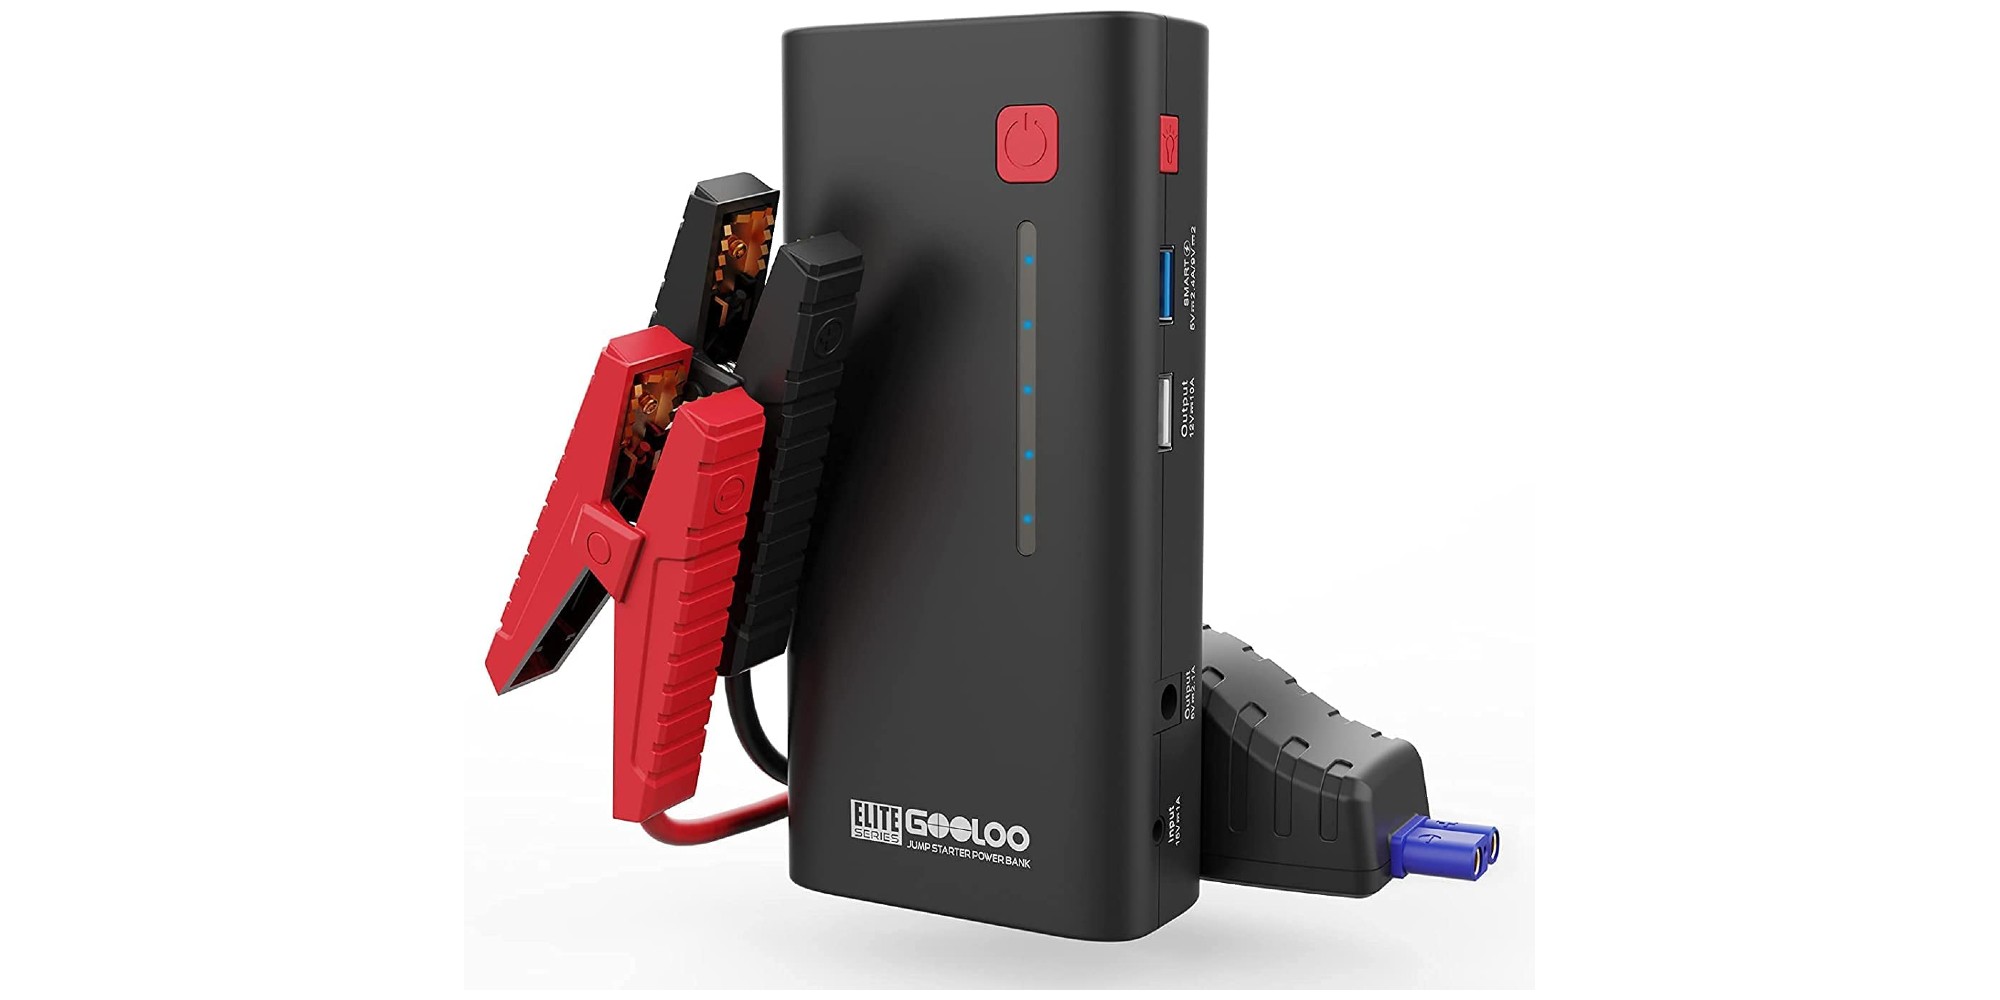 https://9to5toys.com/wp-content/uploads/sites/5/2021/10/gooloo-1200a-portable-jump-starter.jpg